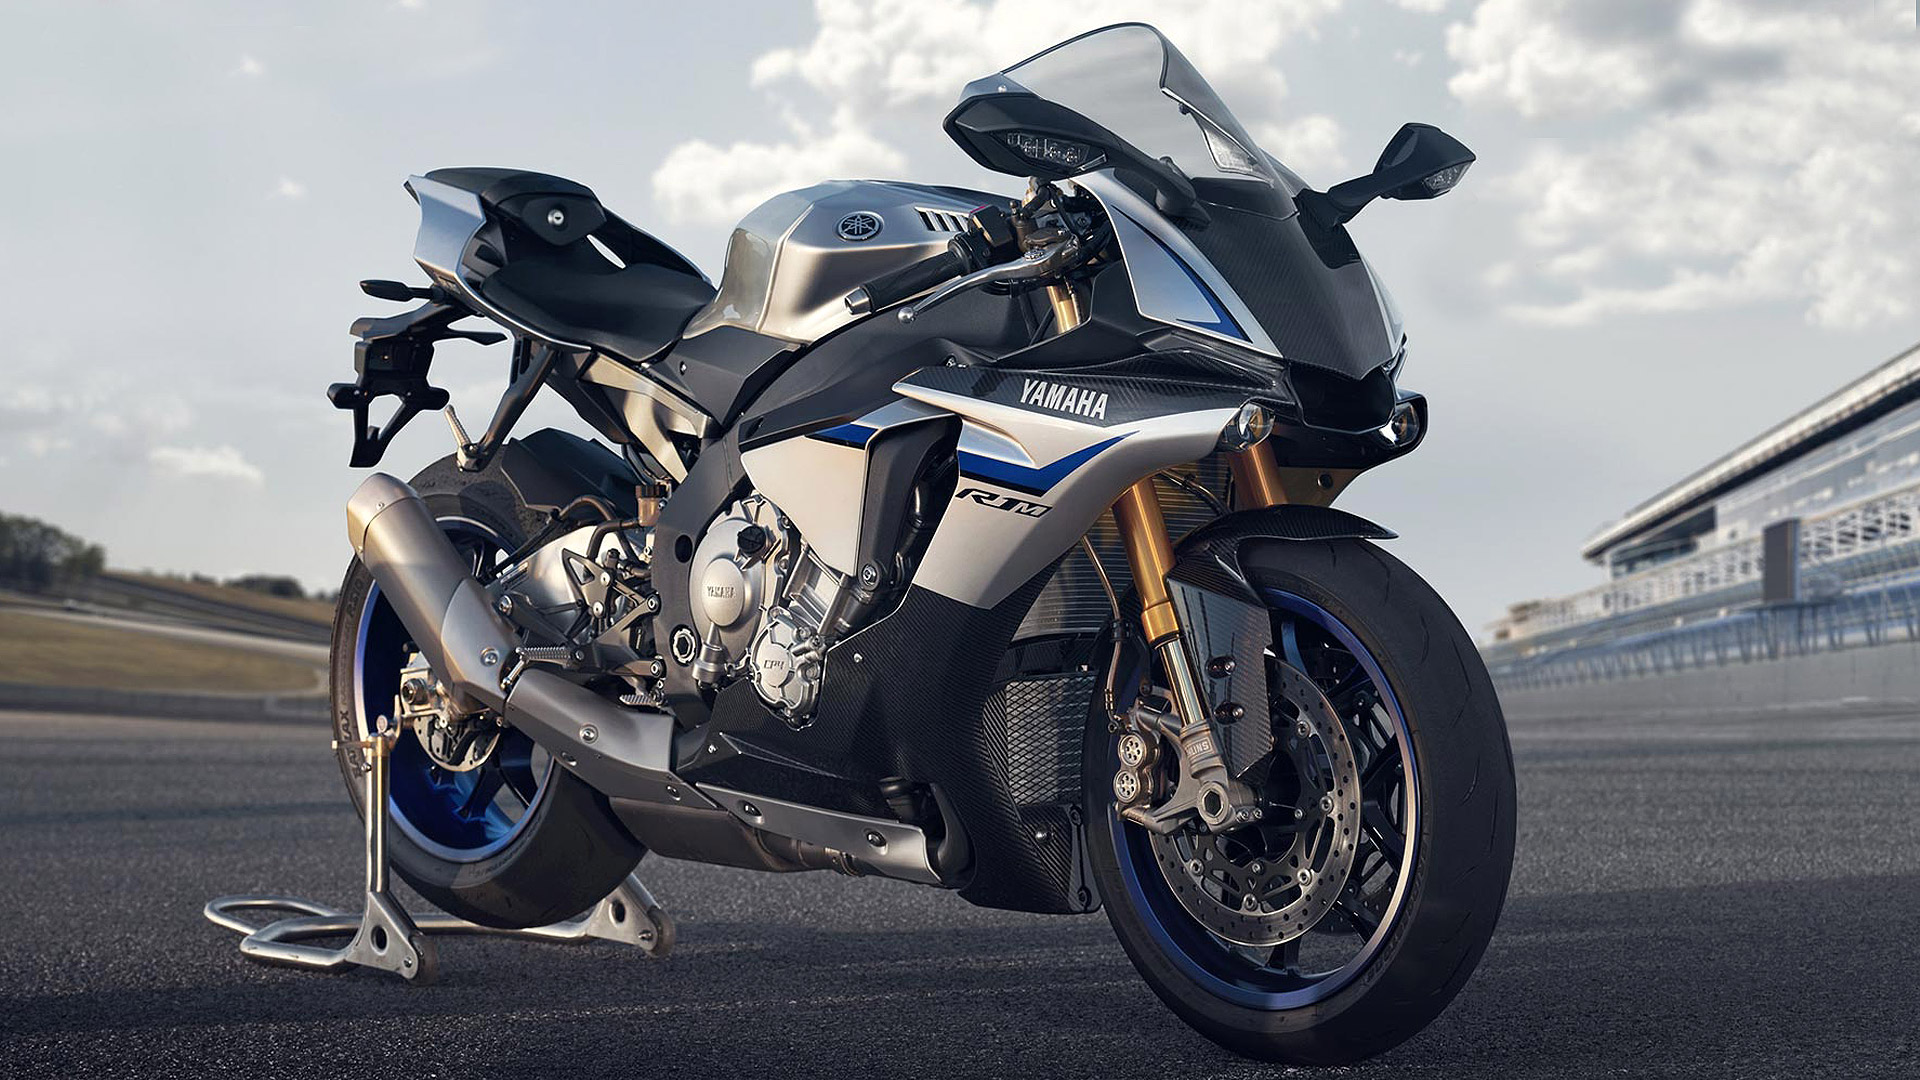 Yamaha Announces Discontinuation of R1 Model Due to Non-Compliance with Euro5+ Regulations